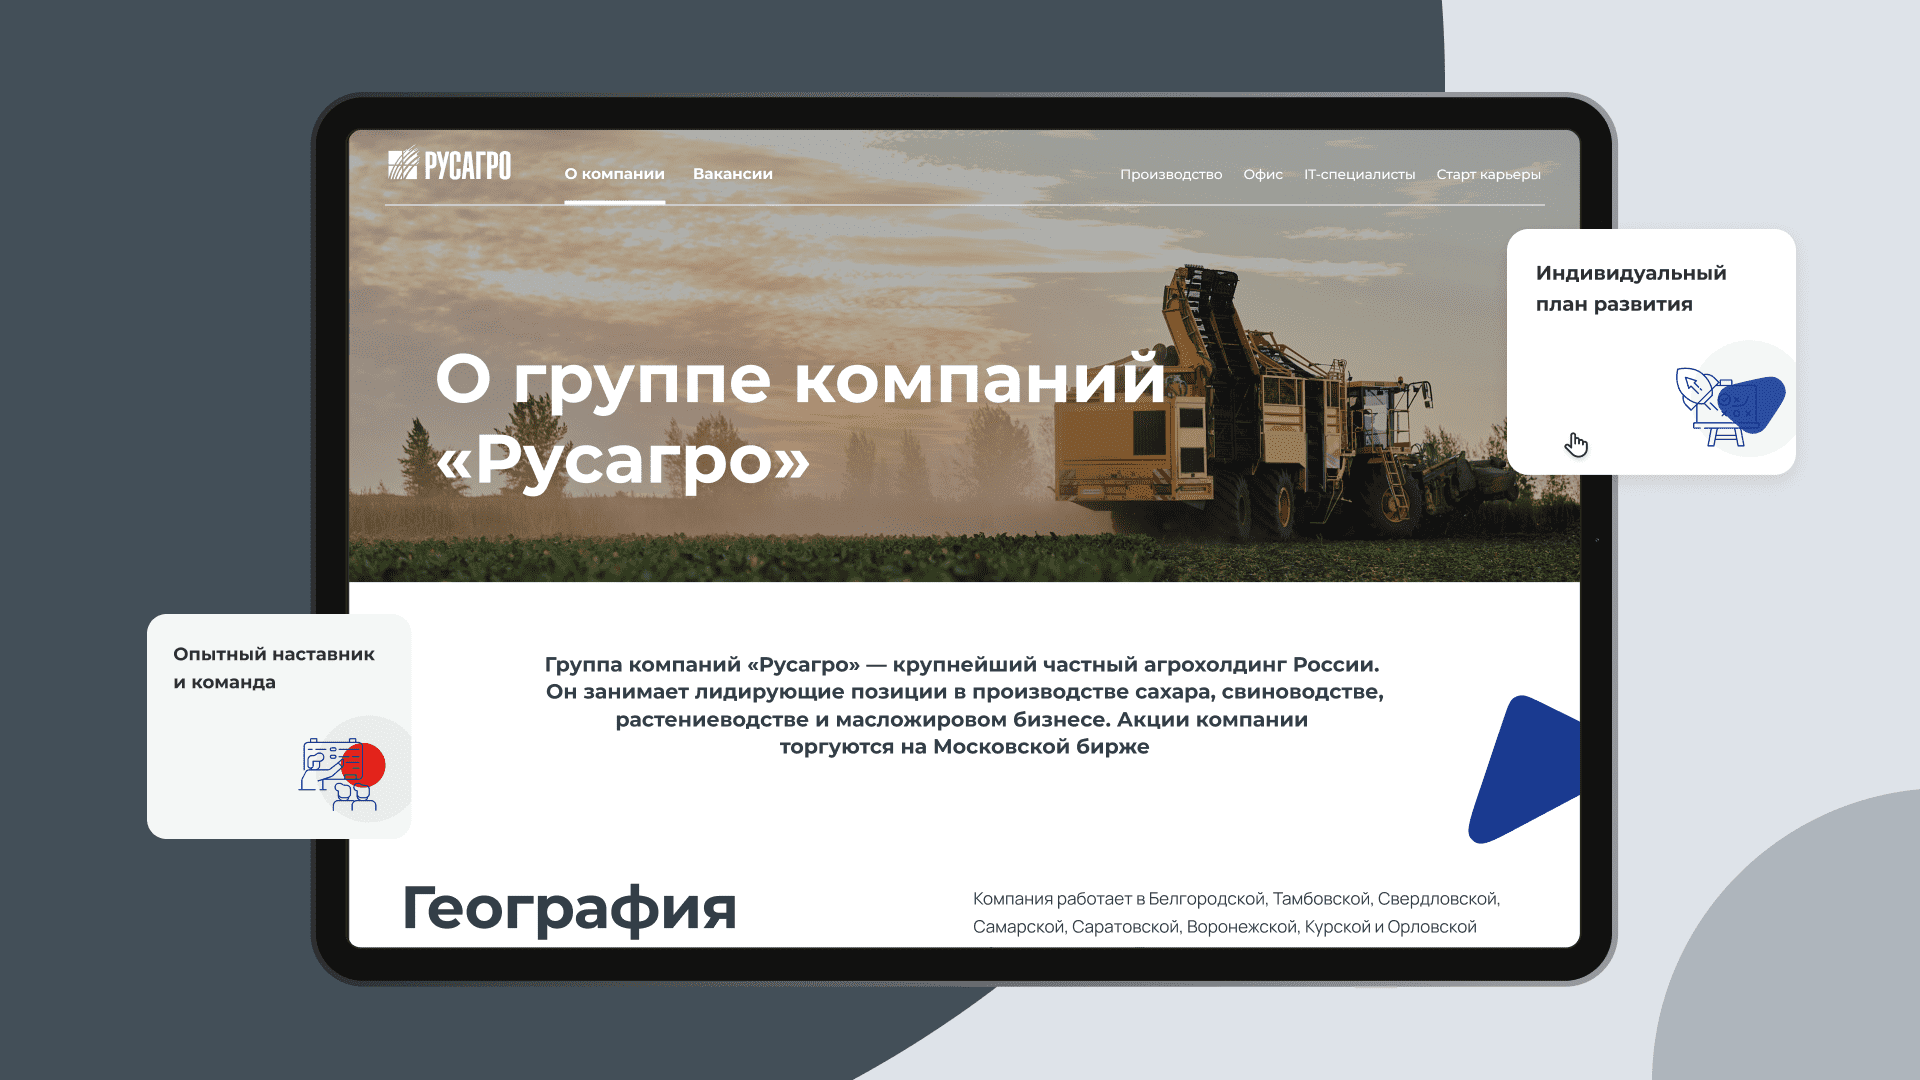 Career site for Rusagro agroholding company